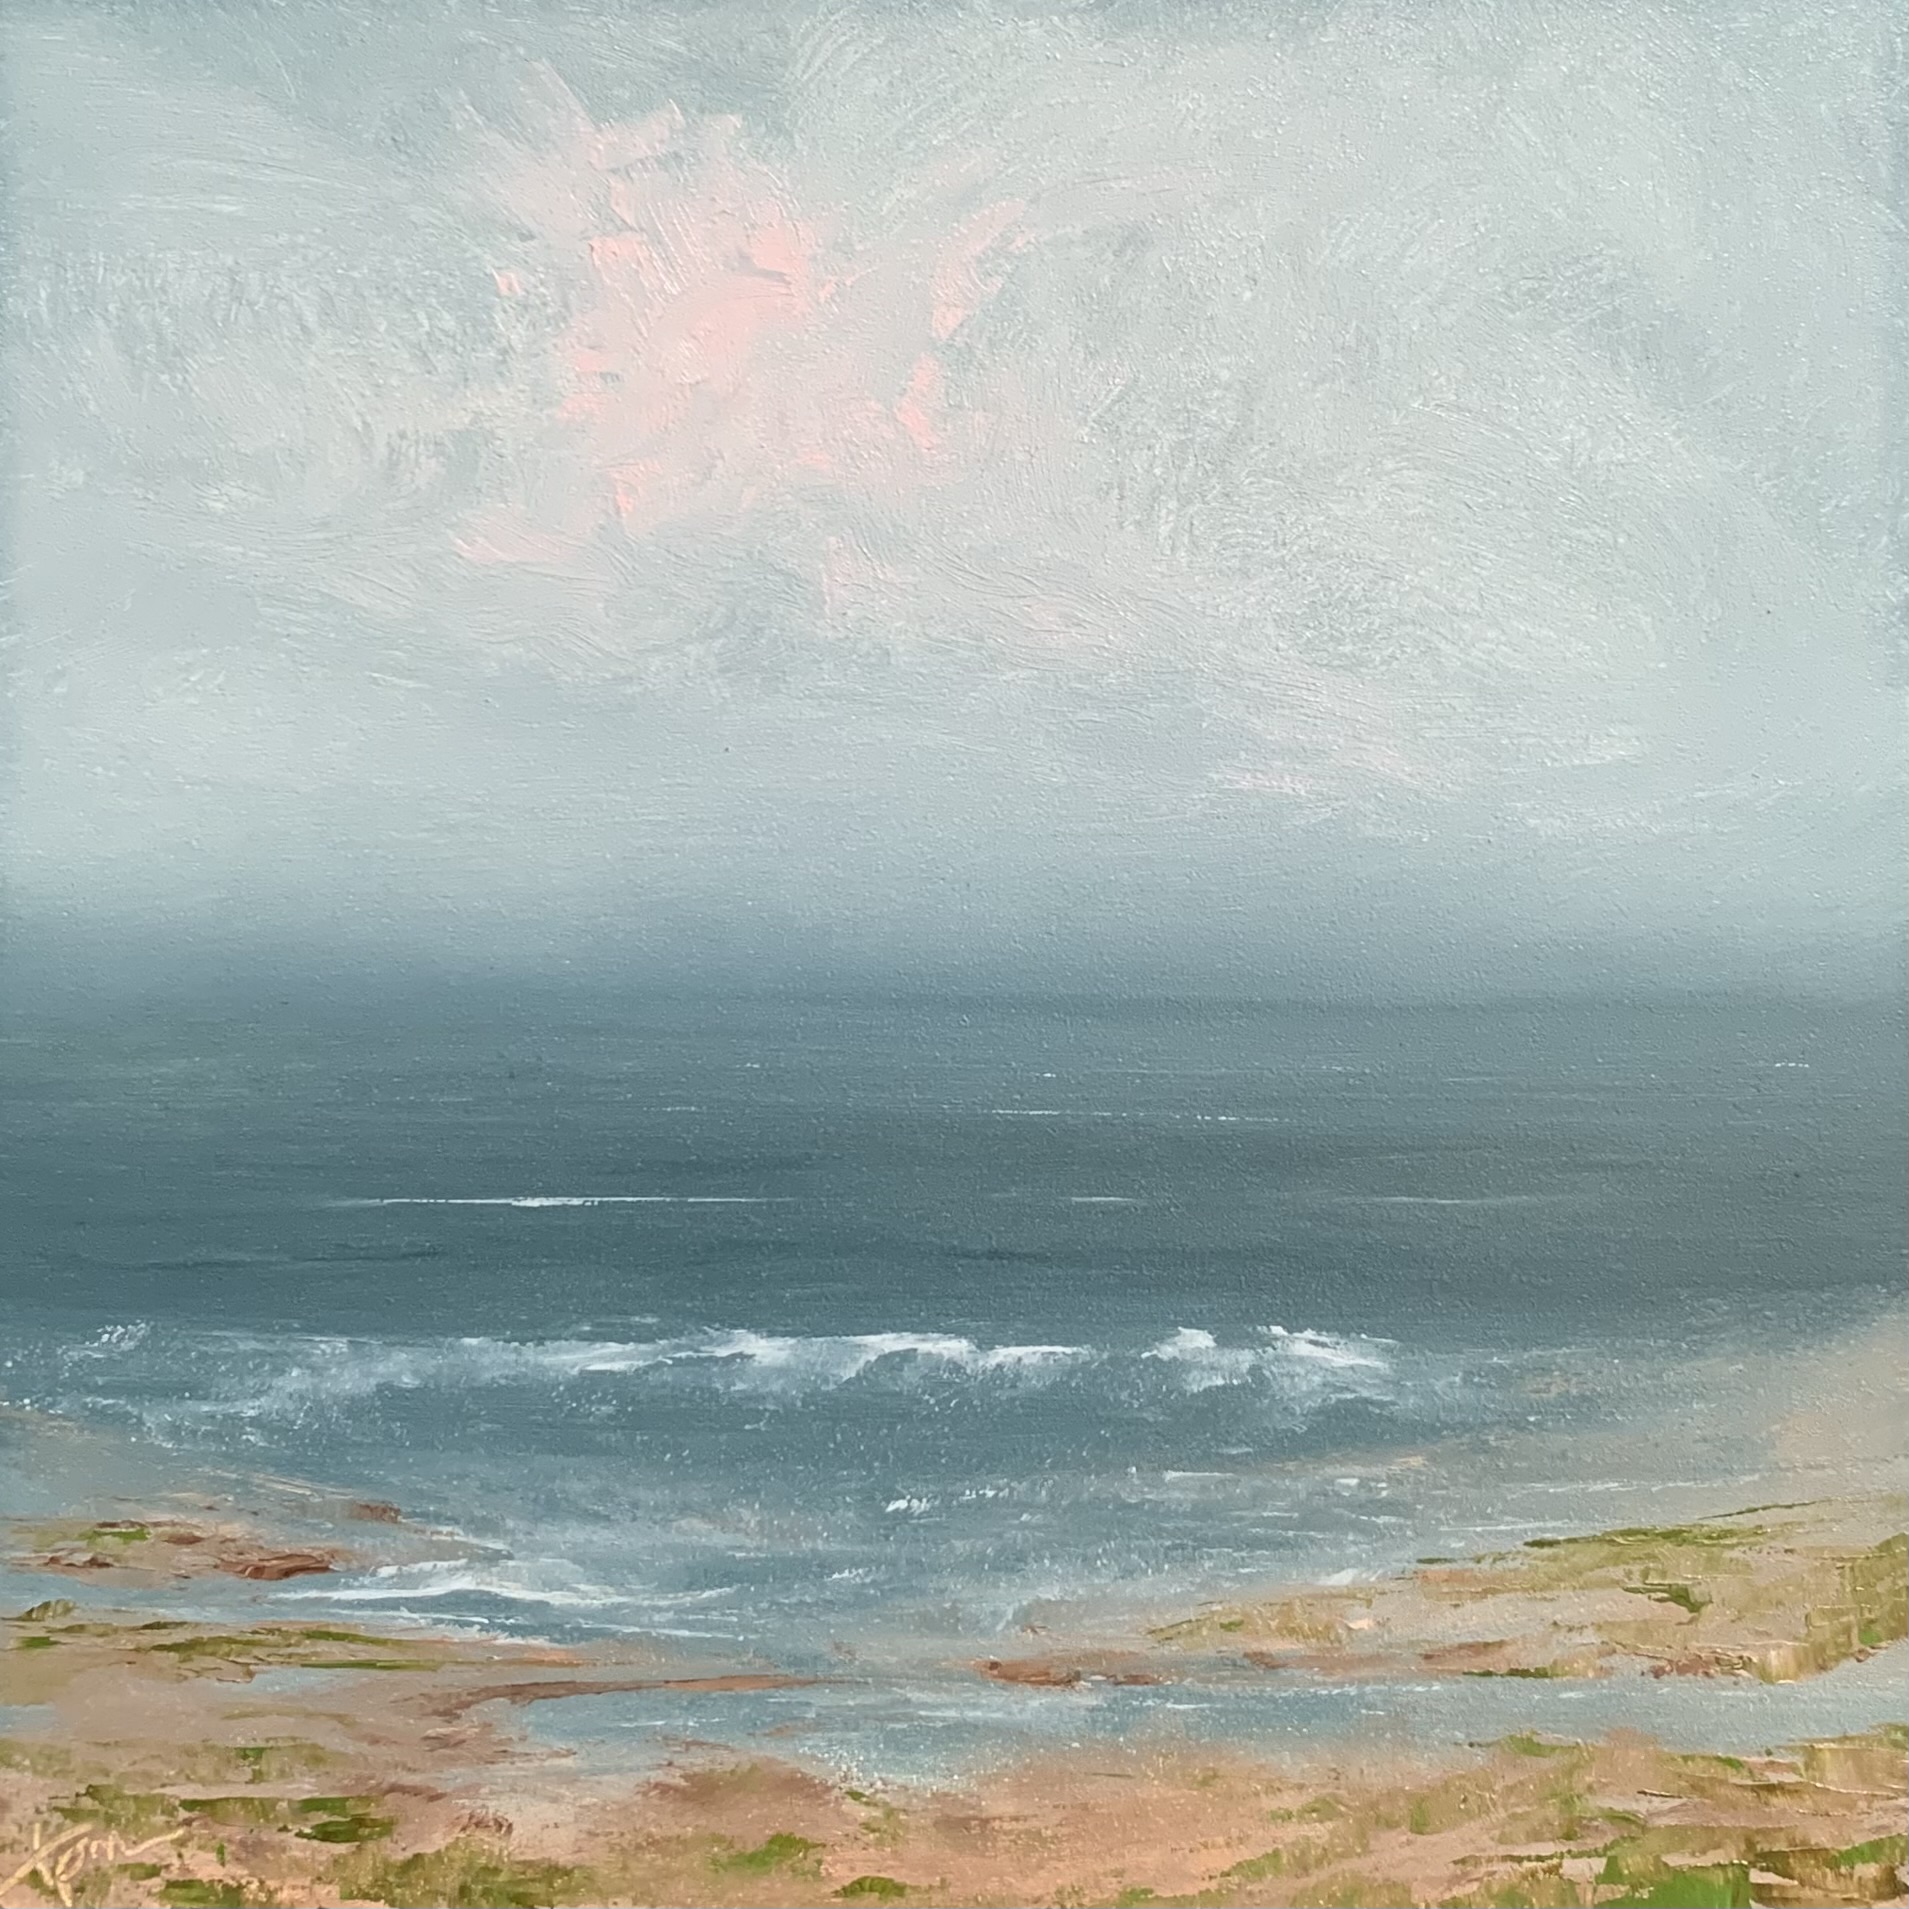 Photo of an original seascape painting by Tisha Mark, “Little Seaside Visits No. 2” 6”x6” oil on Gessobord (2023). This seascape features a soft springtime color palette with soft pink clouds in a blue sky over peaceful ocean. The shore features bits of sea grass just greening up.